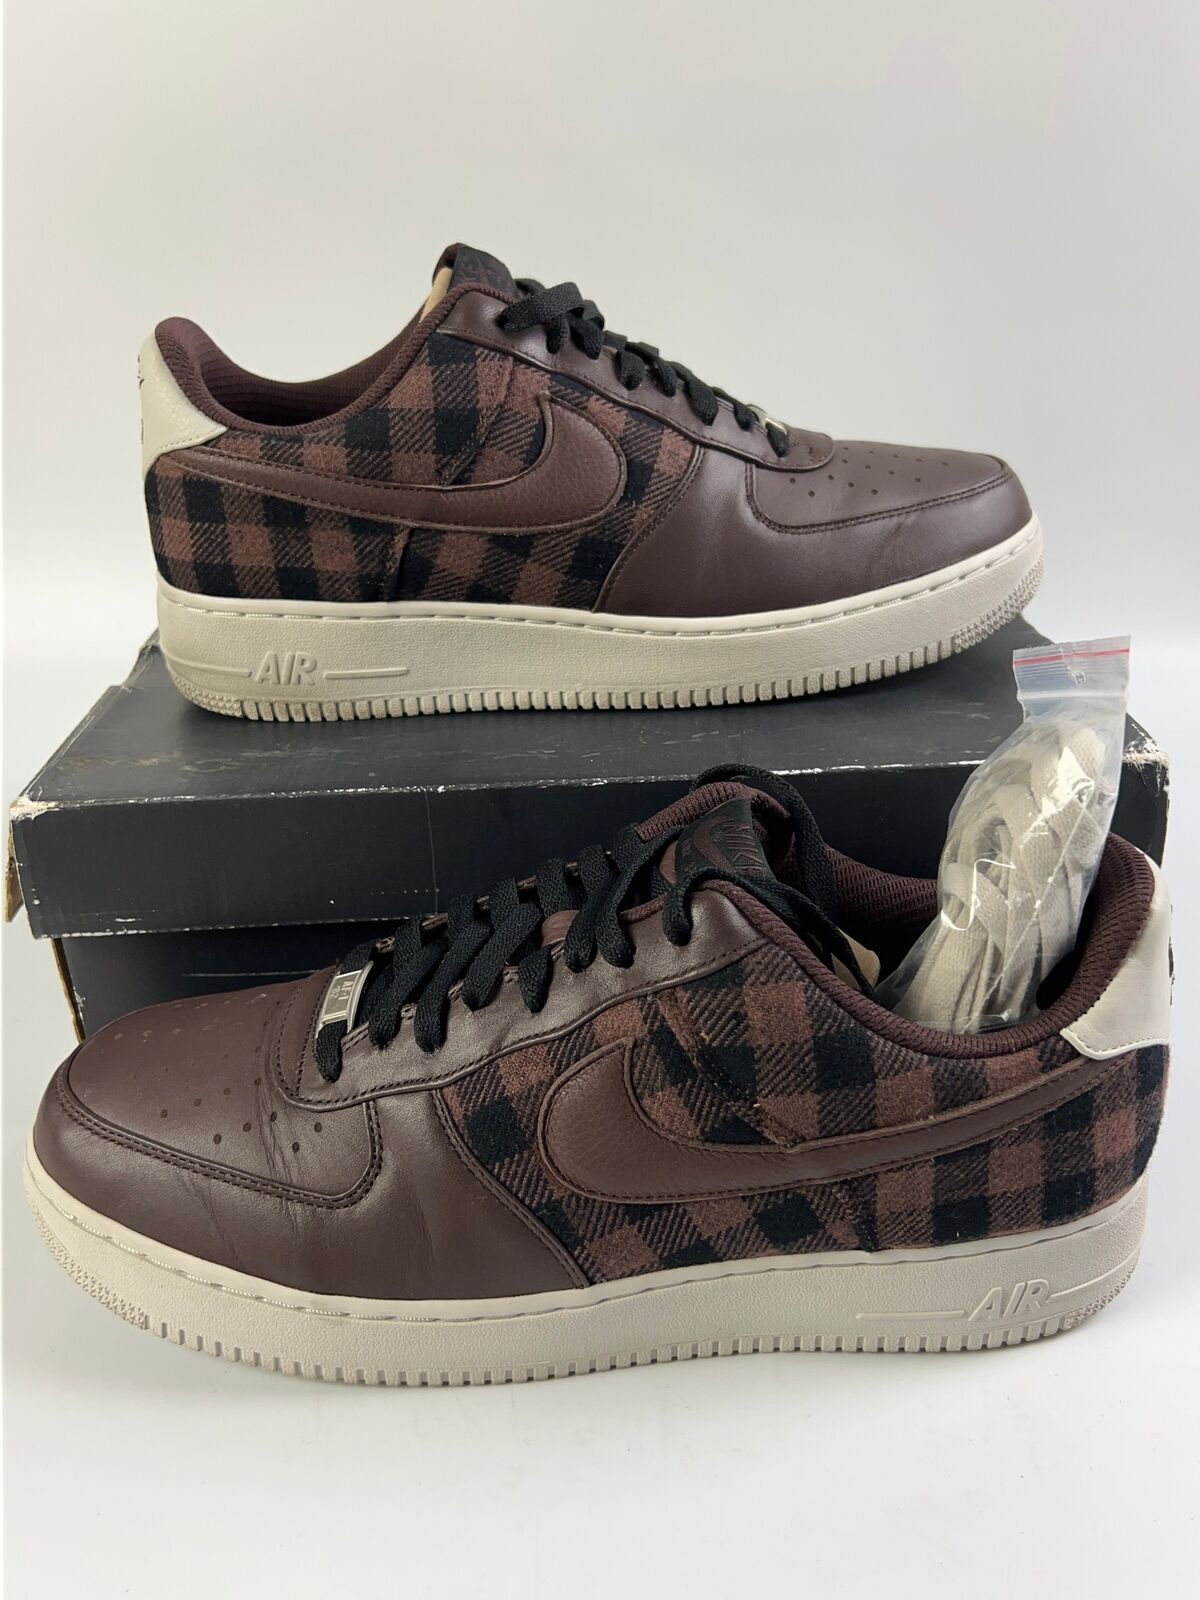 Primary image for Nike Air Force 1 Premium '07 Brown - Boulder Flannel Size 12 315180-224